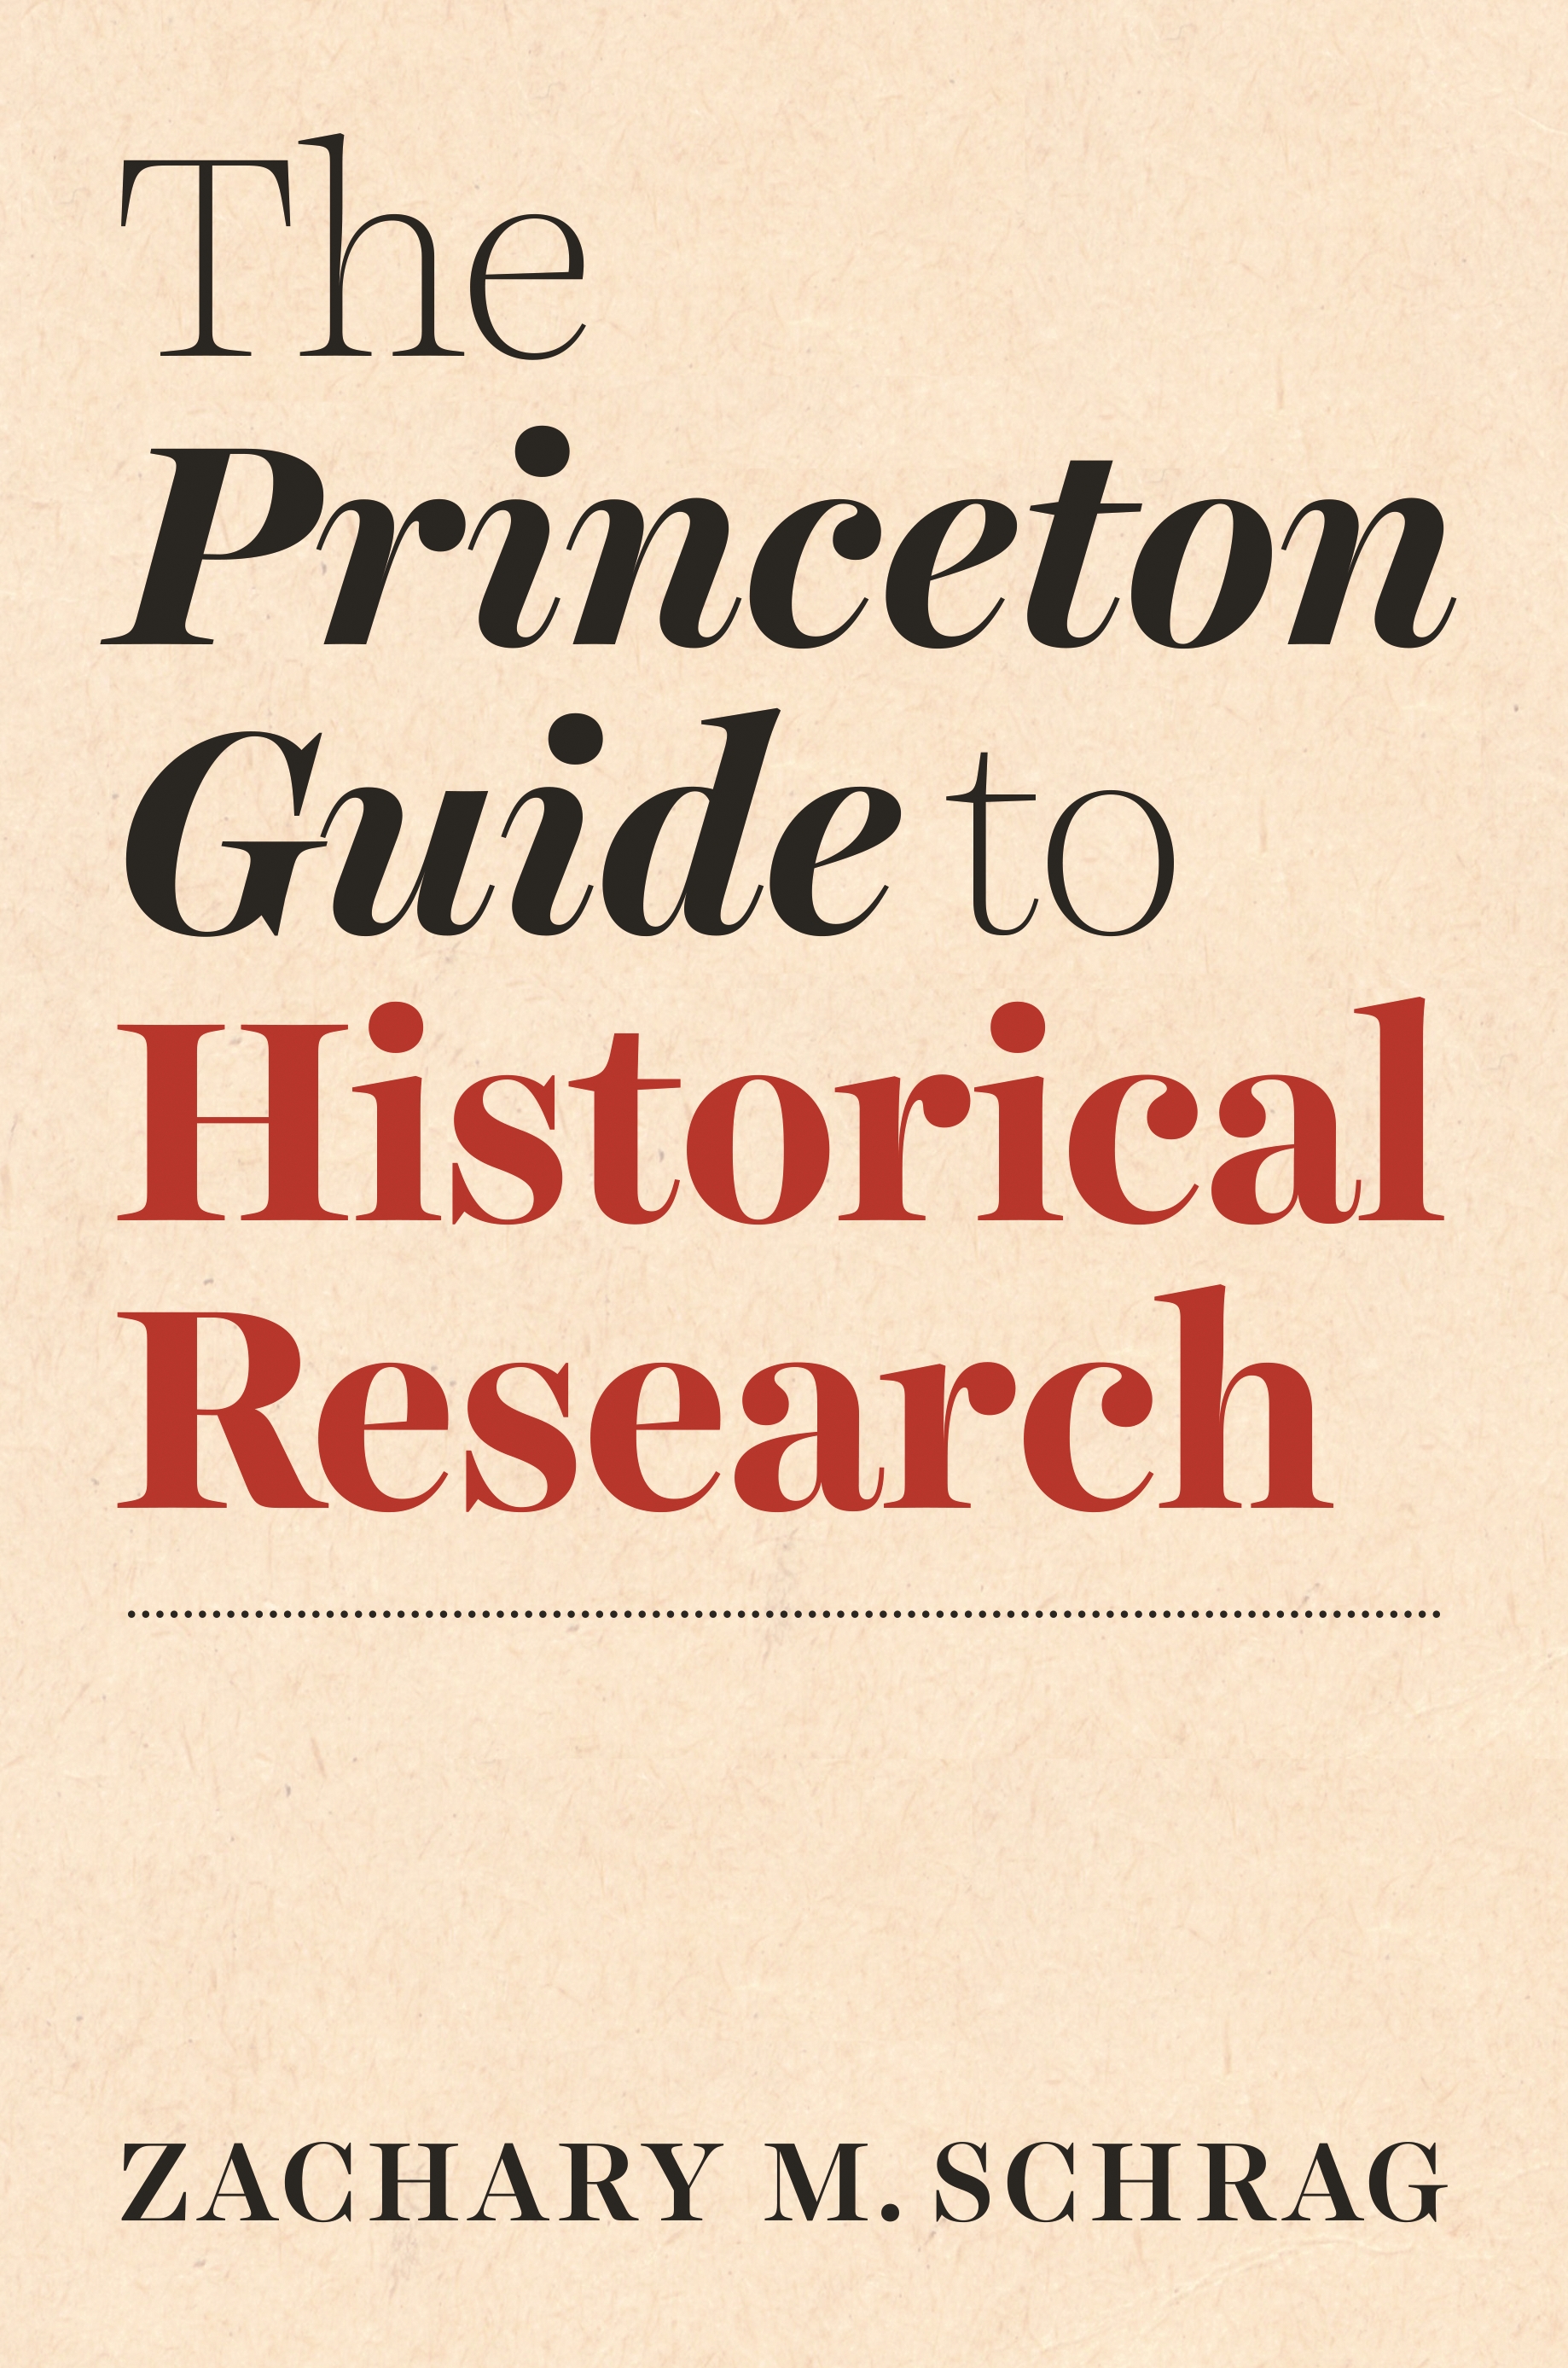 history for research methods